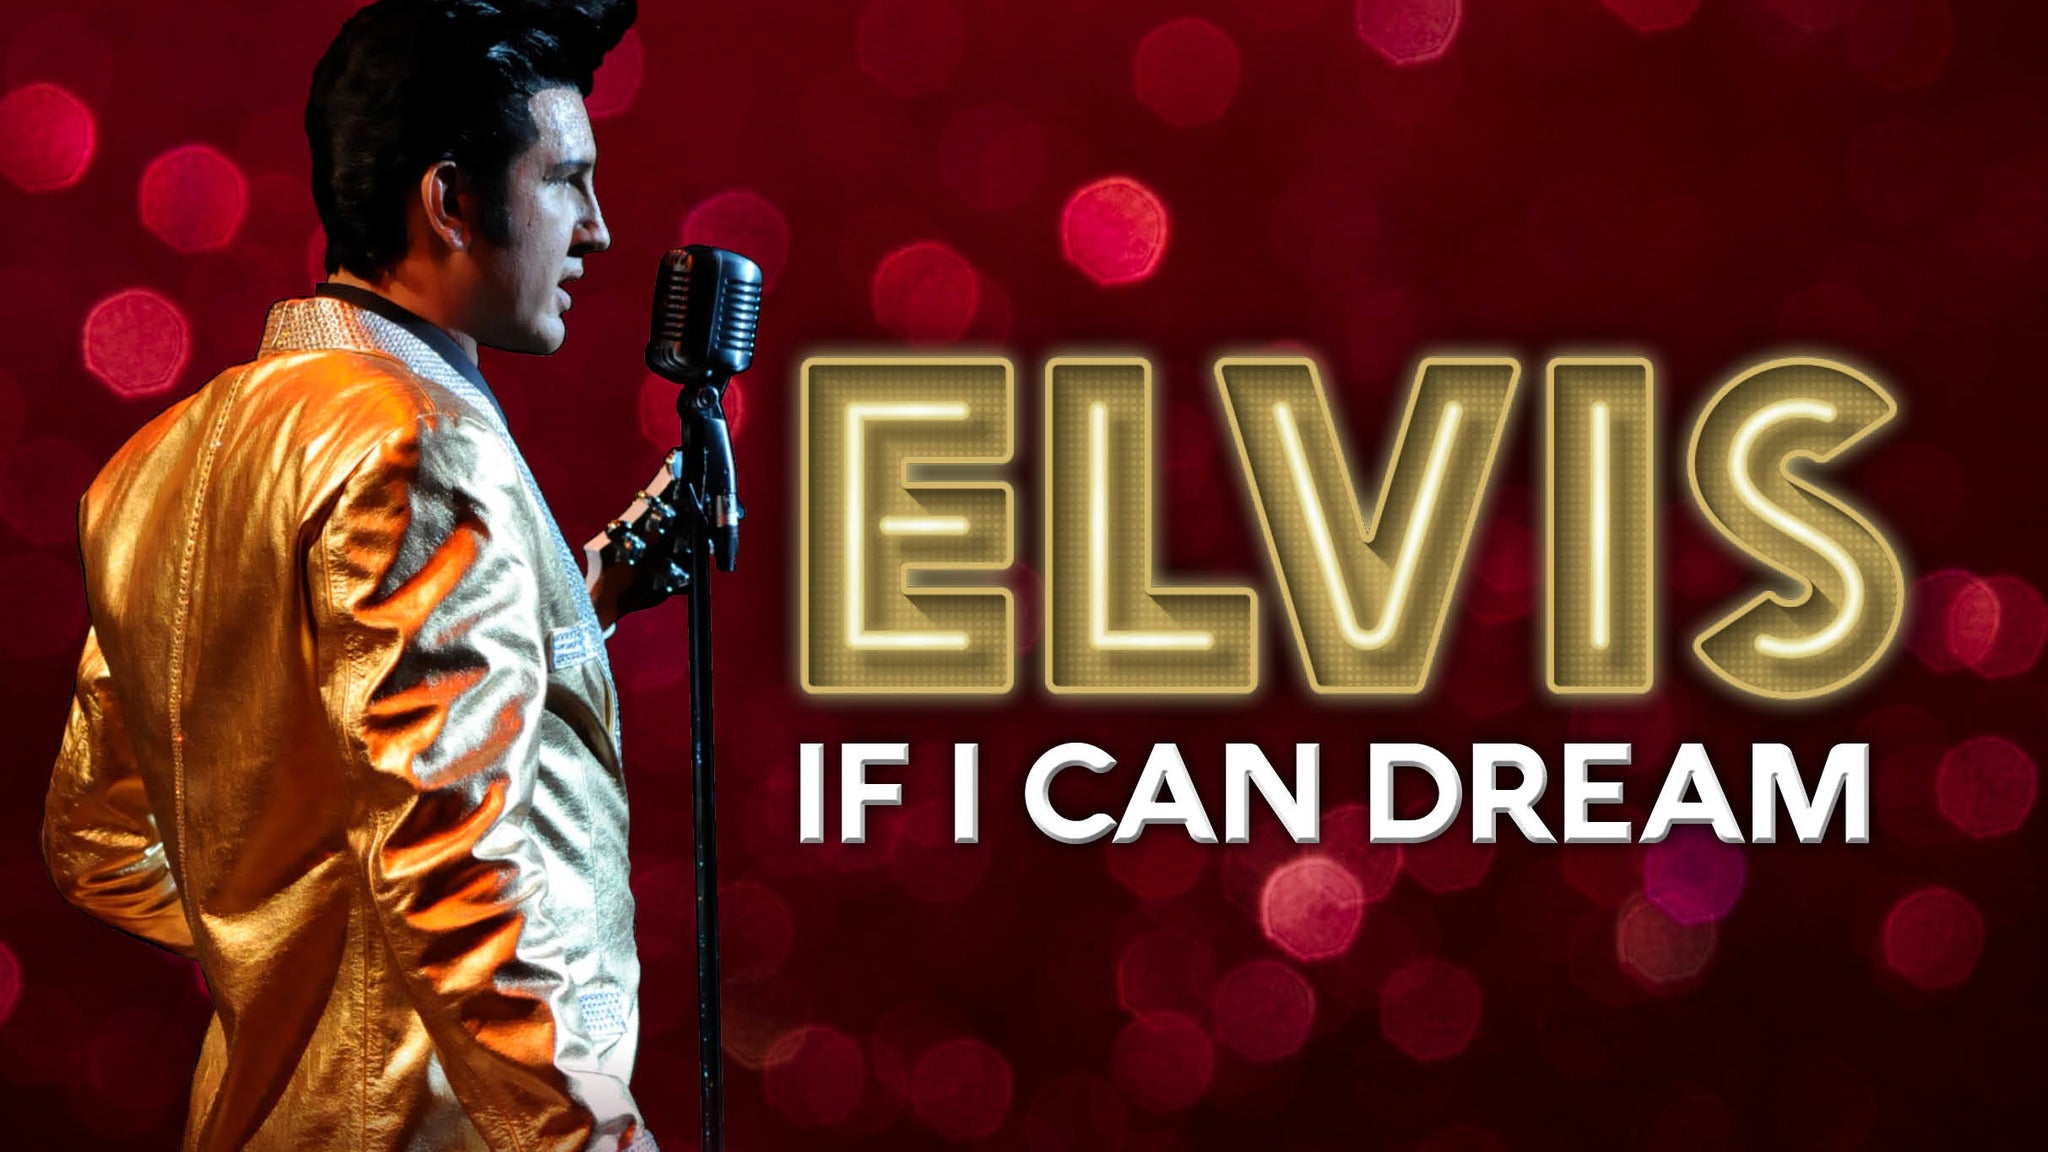 Image used with permission from Ticketmaster | Elvis - If I Can Dream tickets